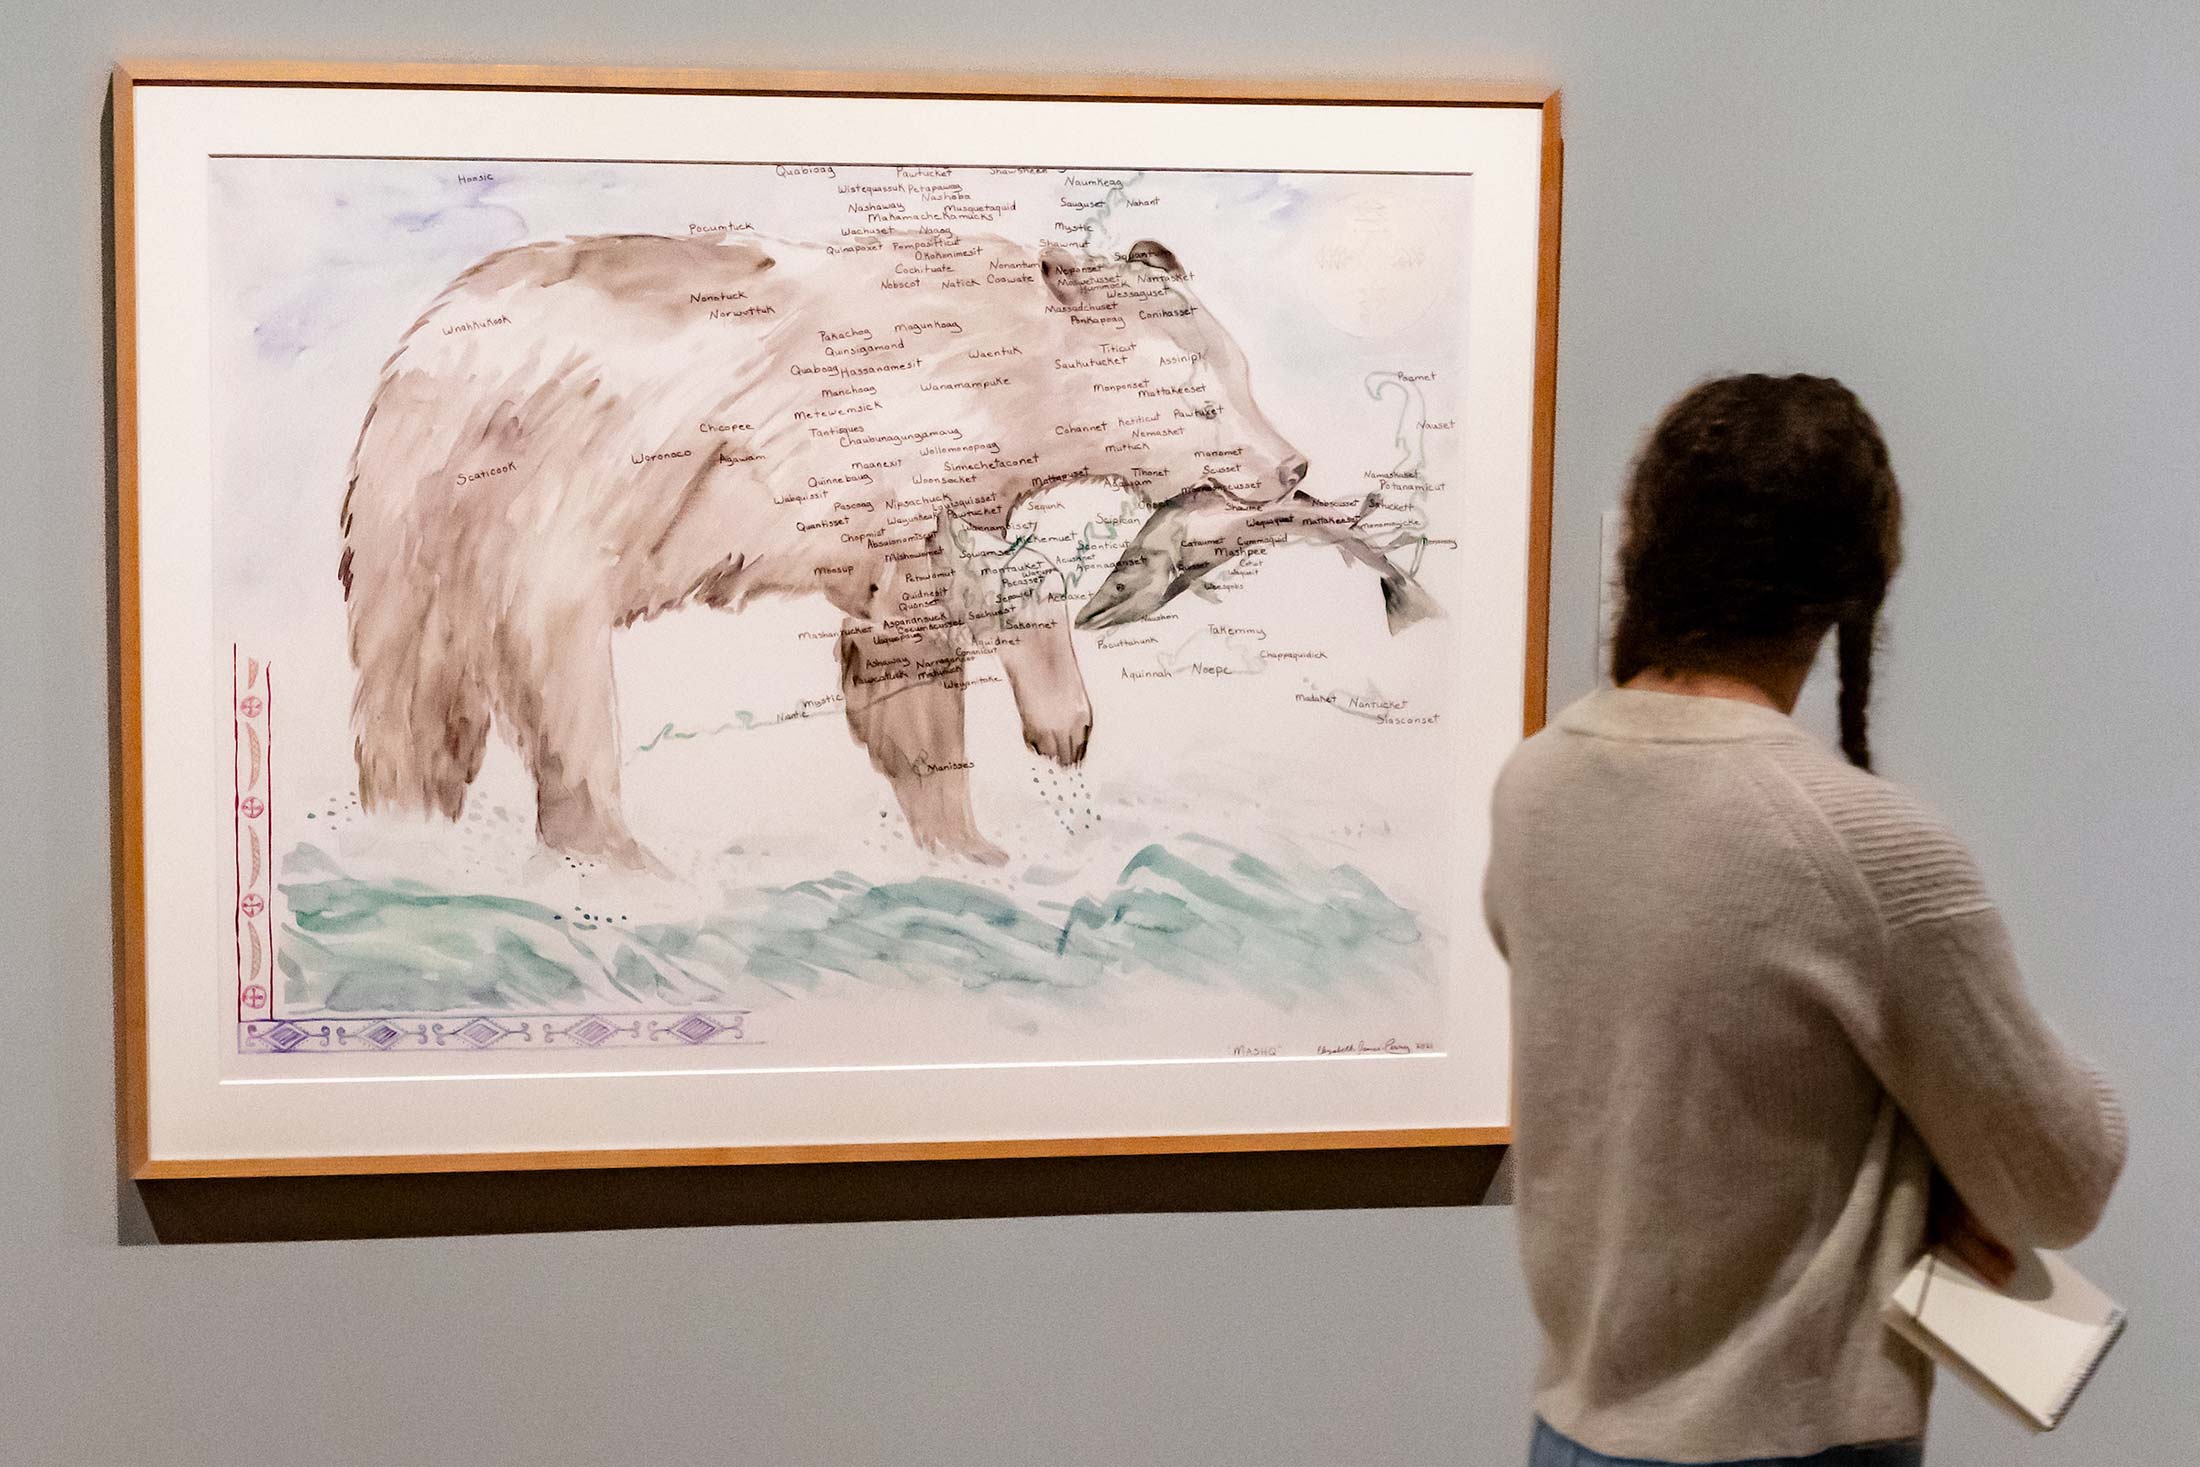 A woman looks at a painting of a map of Massachusetts shaped like a bear.